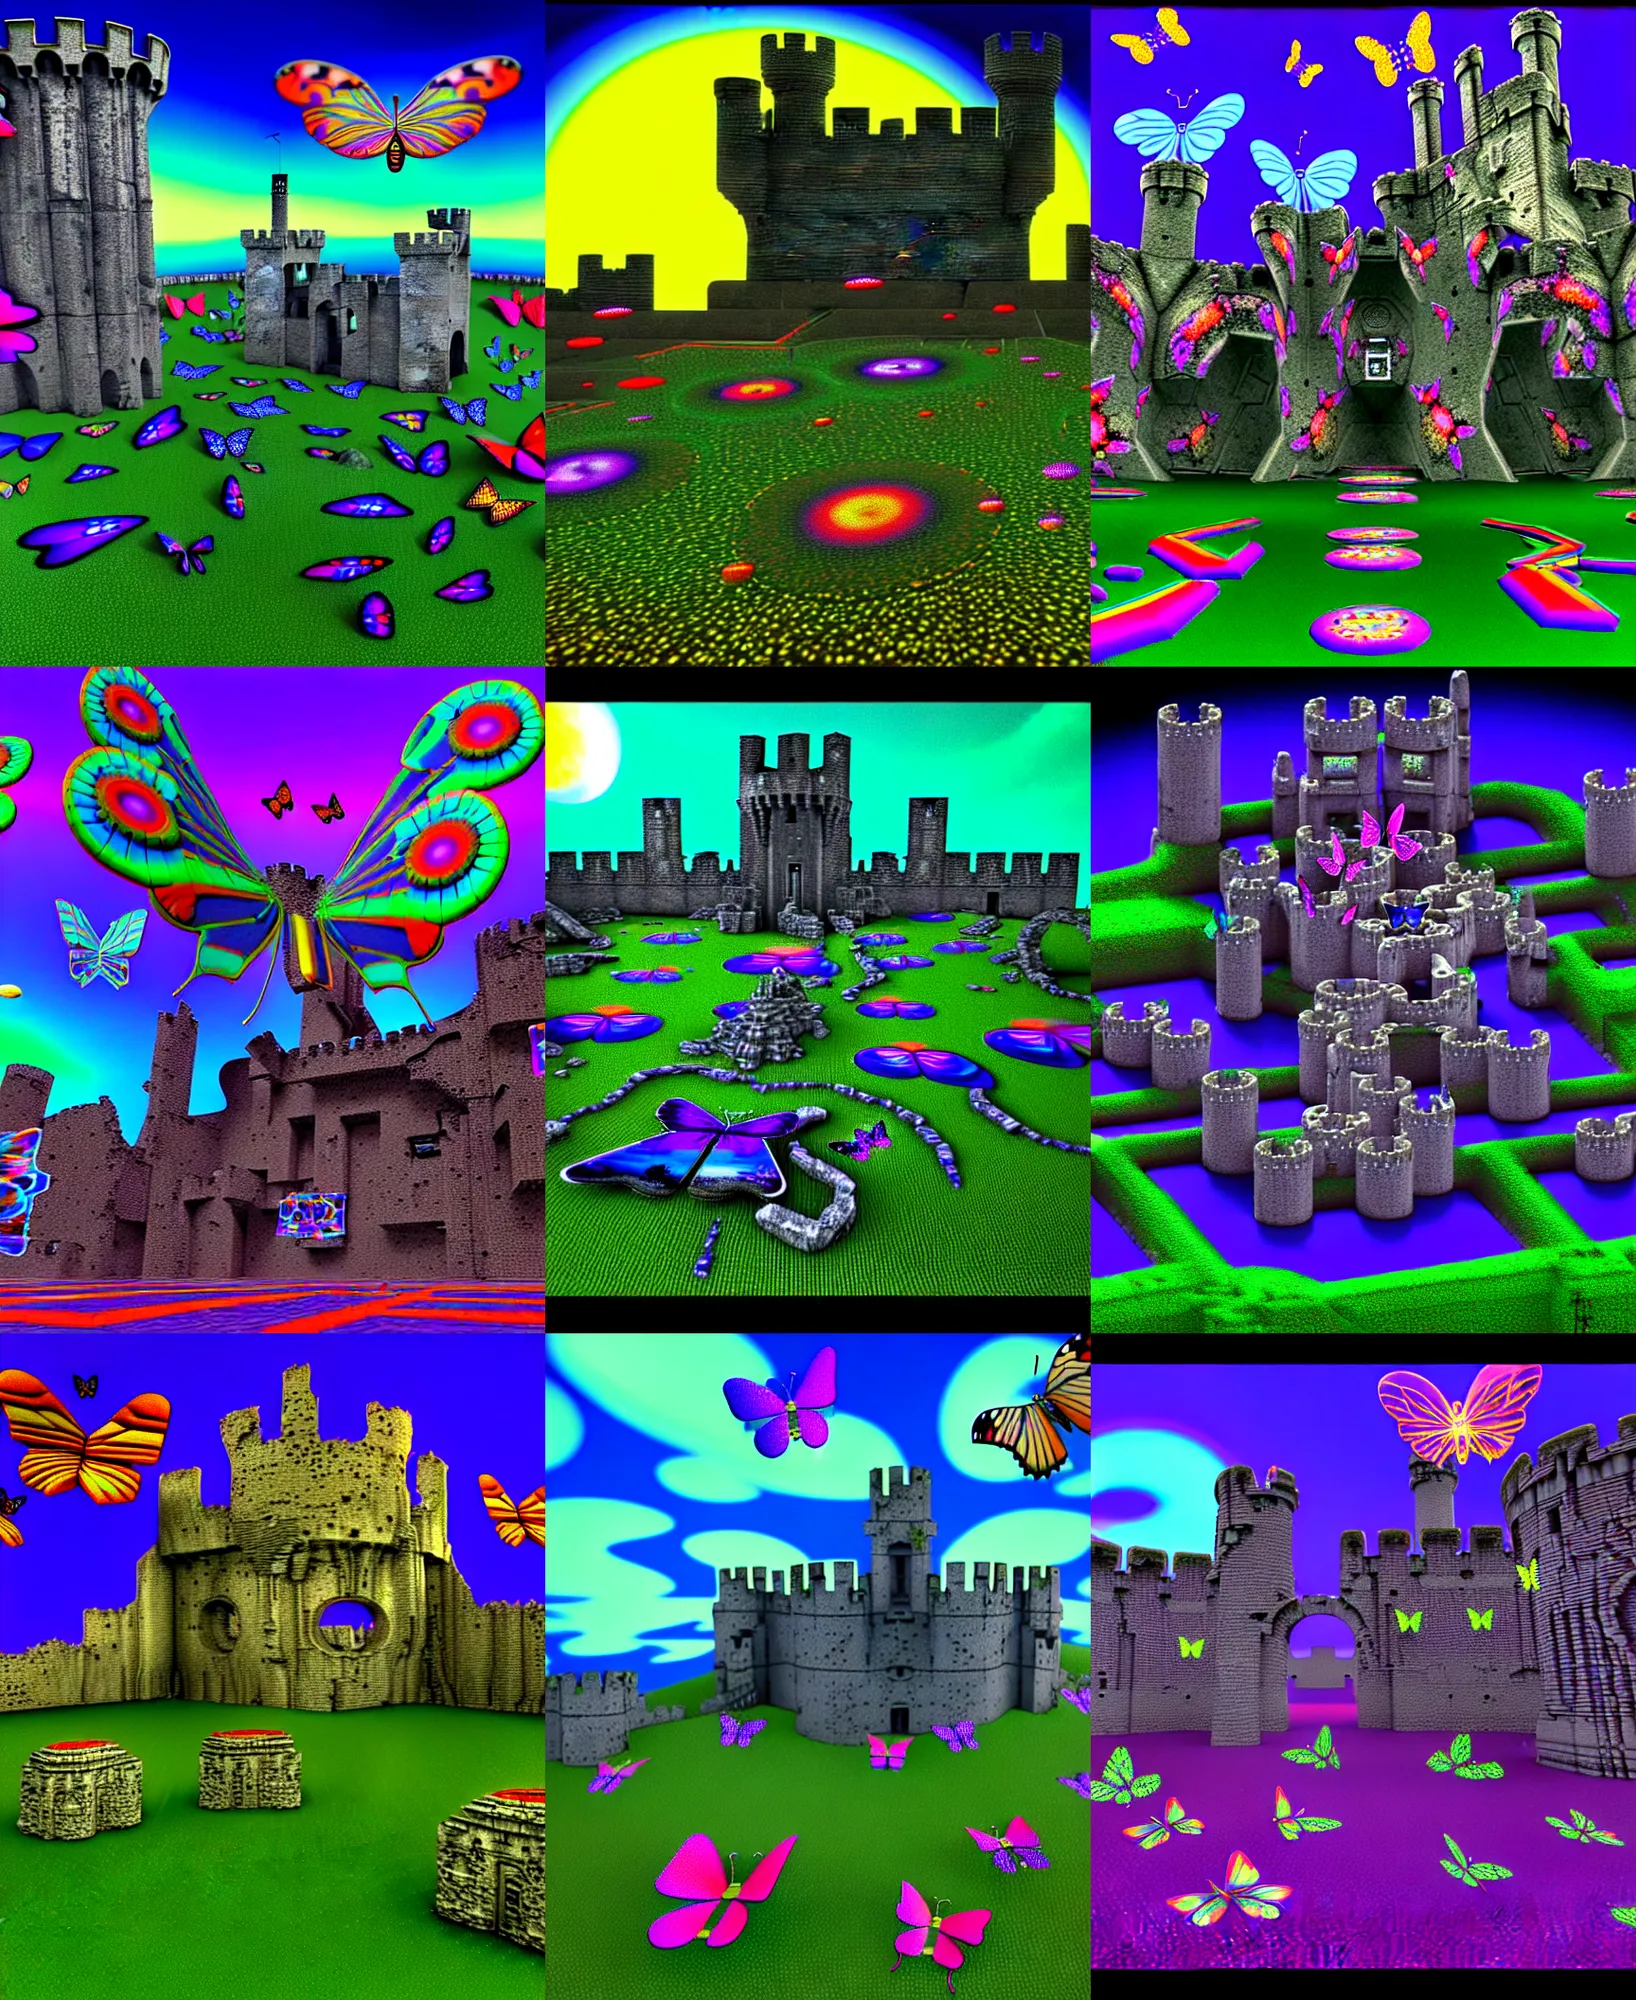 Prompt: 3 d render of cybernetic demoscene landscape with castle ruins against a psychedelic surreal background with 3 d butterflies and 3 d flowers and 3 d clocks and angels n the style of 1 9 9 0's demoscene cgi graphics, lsd dream emulator psx, 3 d rendered y 2 k aesthetic by ichiro tanida, 3 do magazine, wide shot